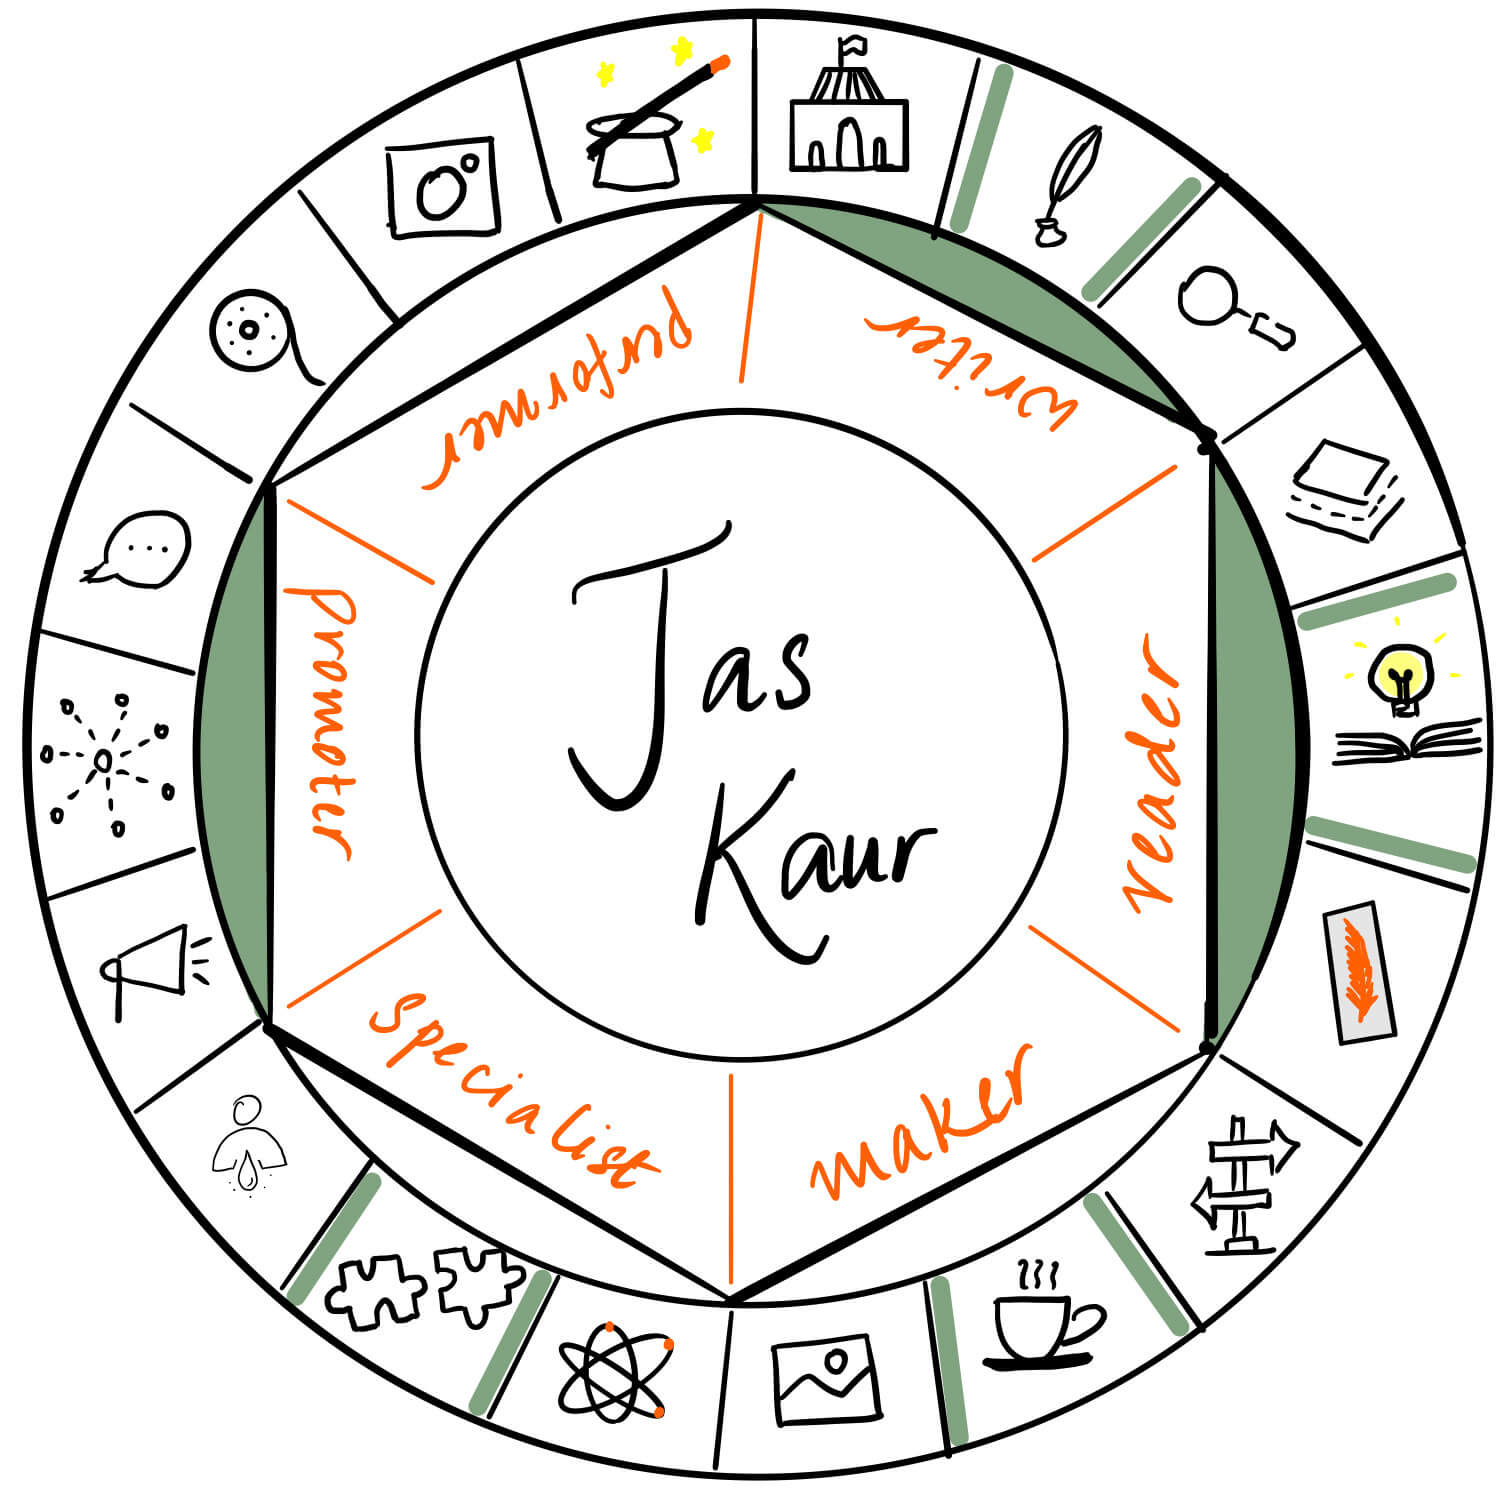 Jas Kaur is a writer, reader and promoter. It's a pleasure to have her over on The Creator's Roulette to talk about being authentic.